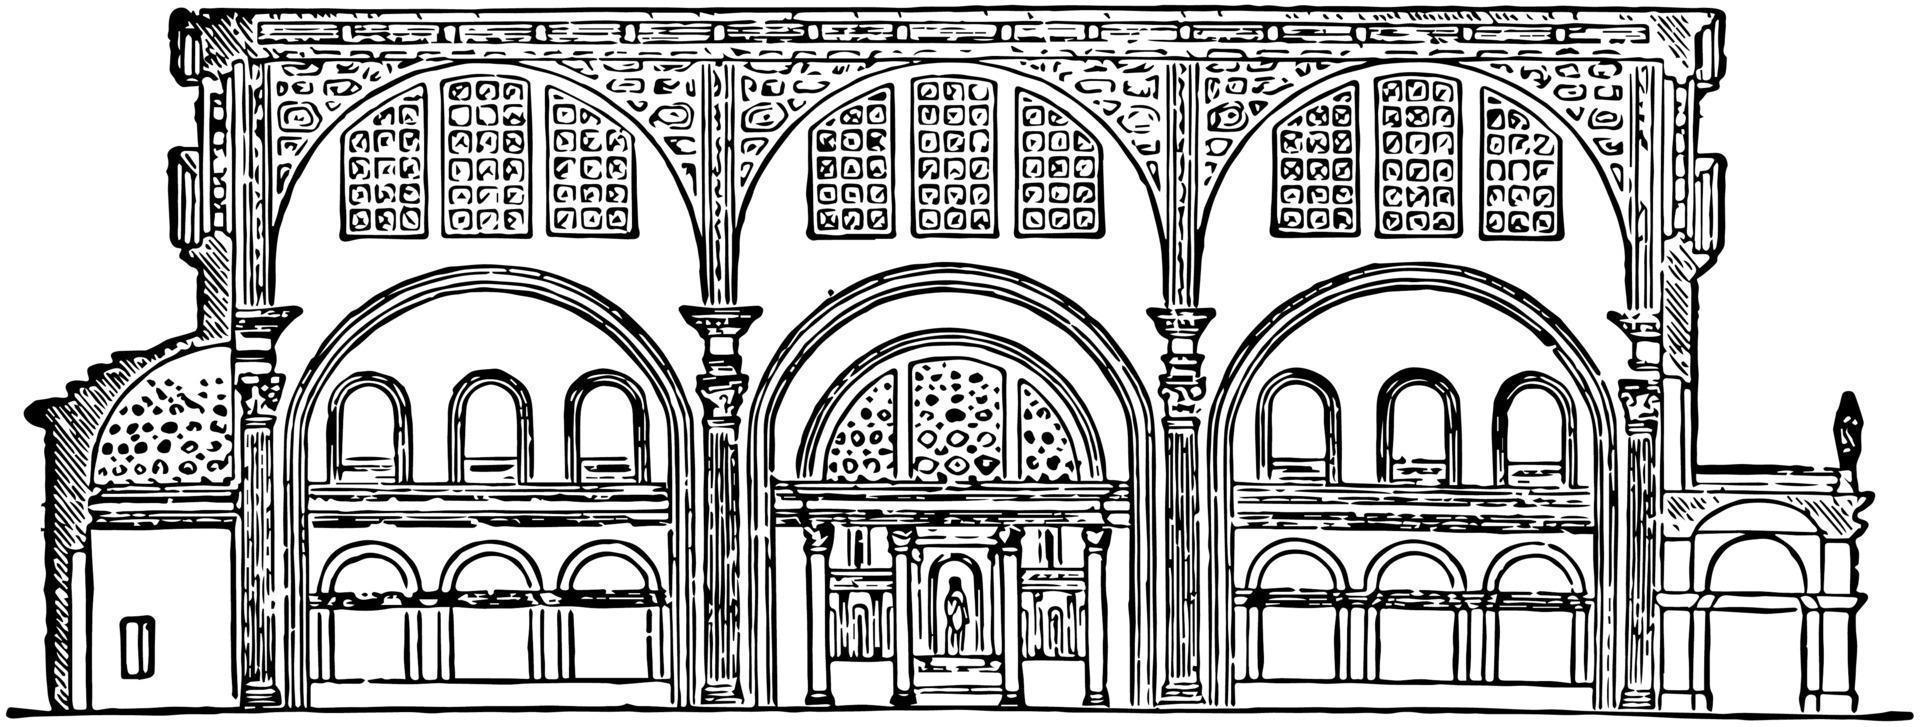 Basilica of Constantine, Section of the Basilica of Maxentius, vintage engraving. vector